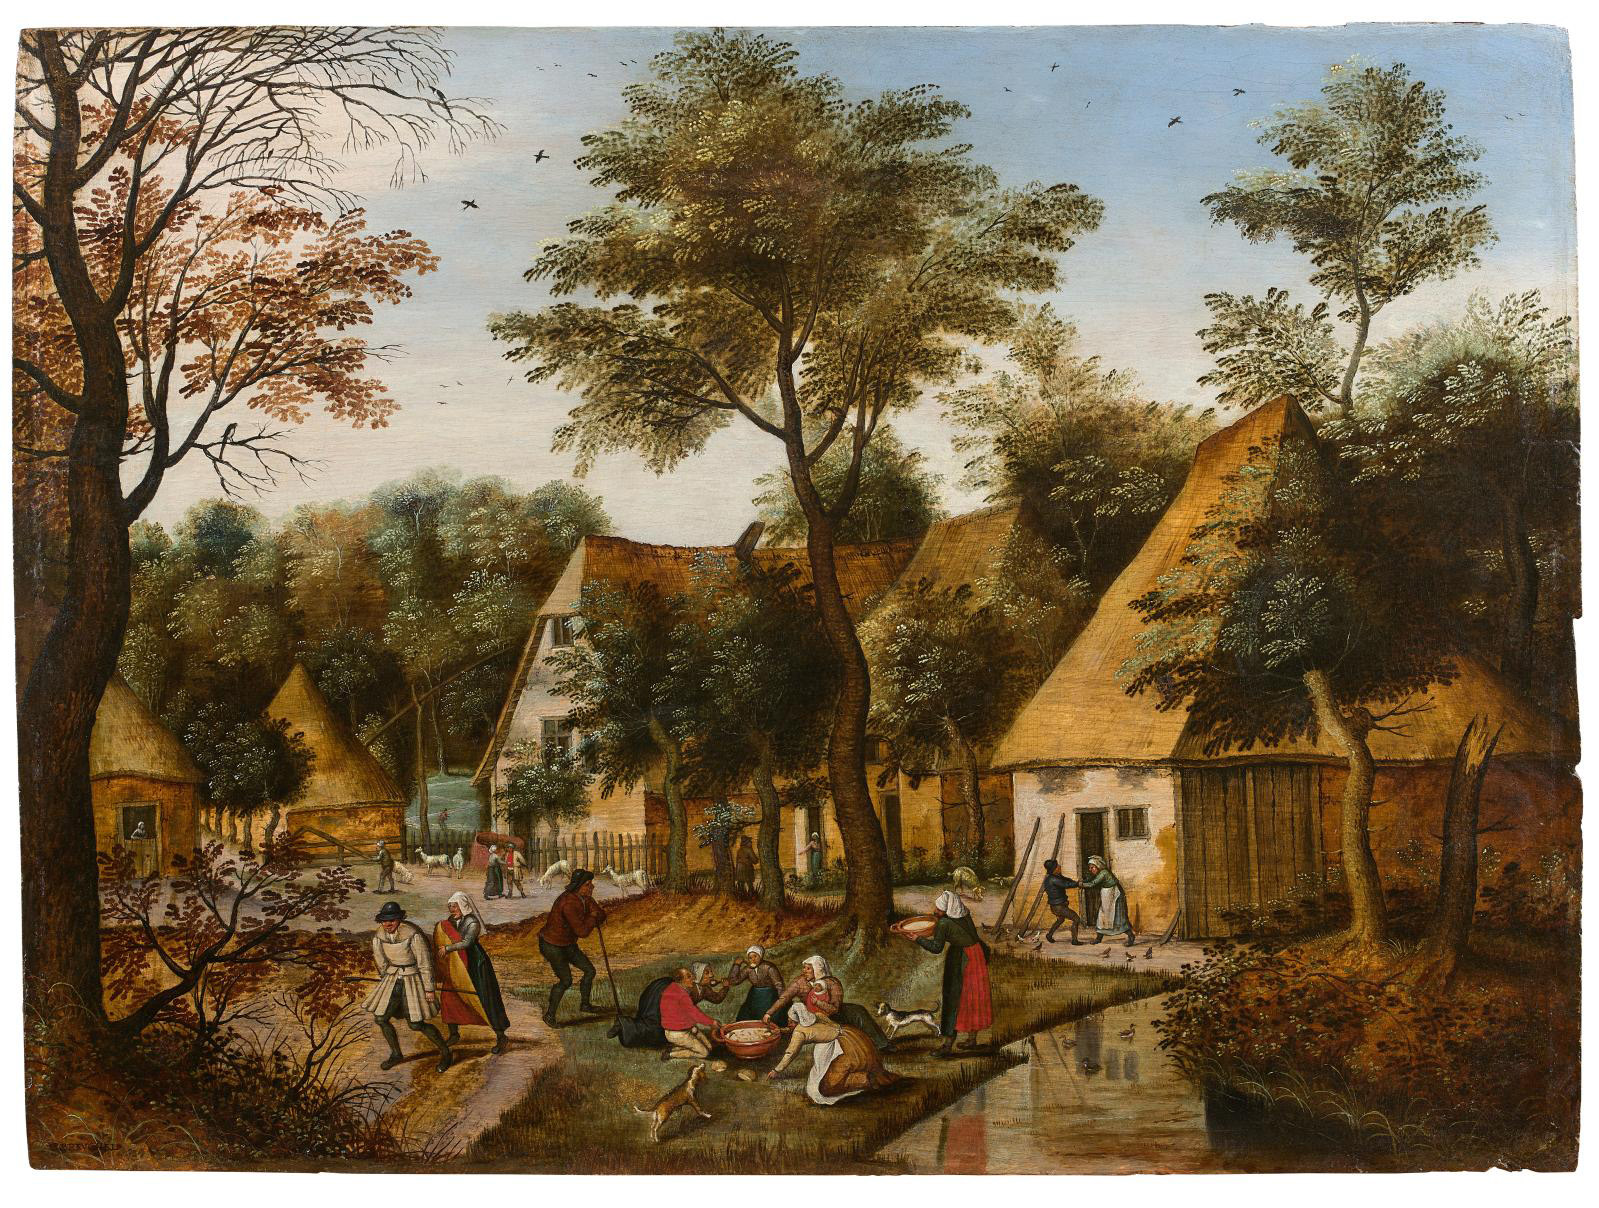 Bruegel the Younger’s 